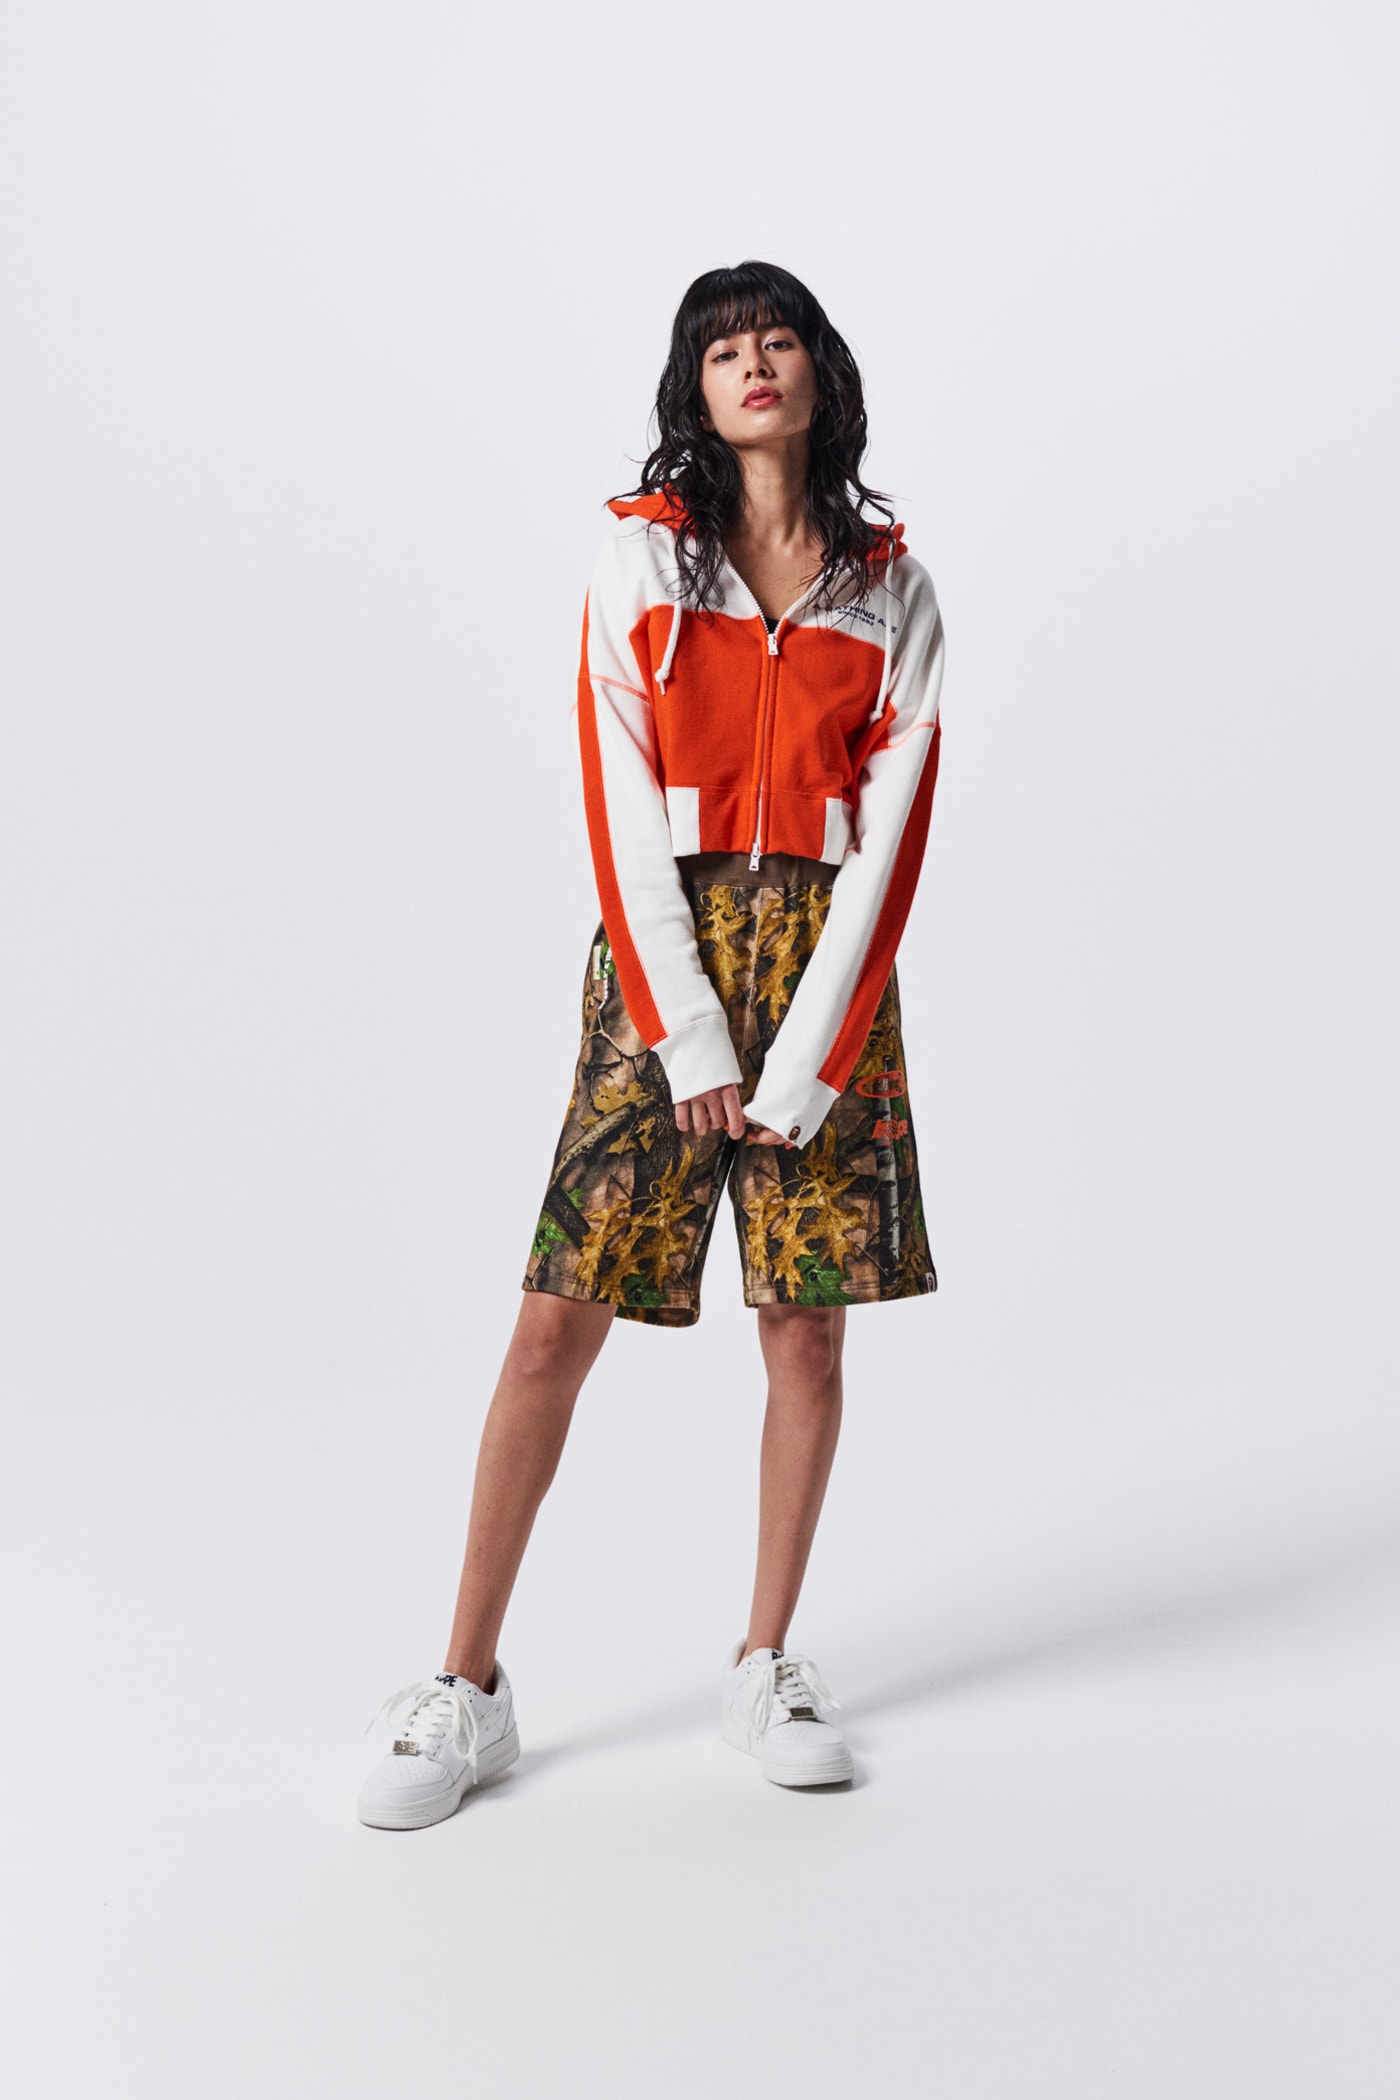 A Bathing Ape Spring Summer 2019 Collection Lookbook Long Sleeved Shirt Orange White Shorts Brown